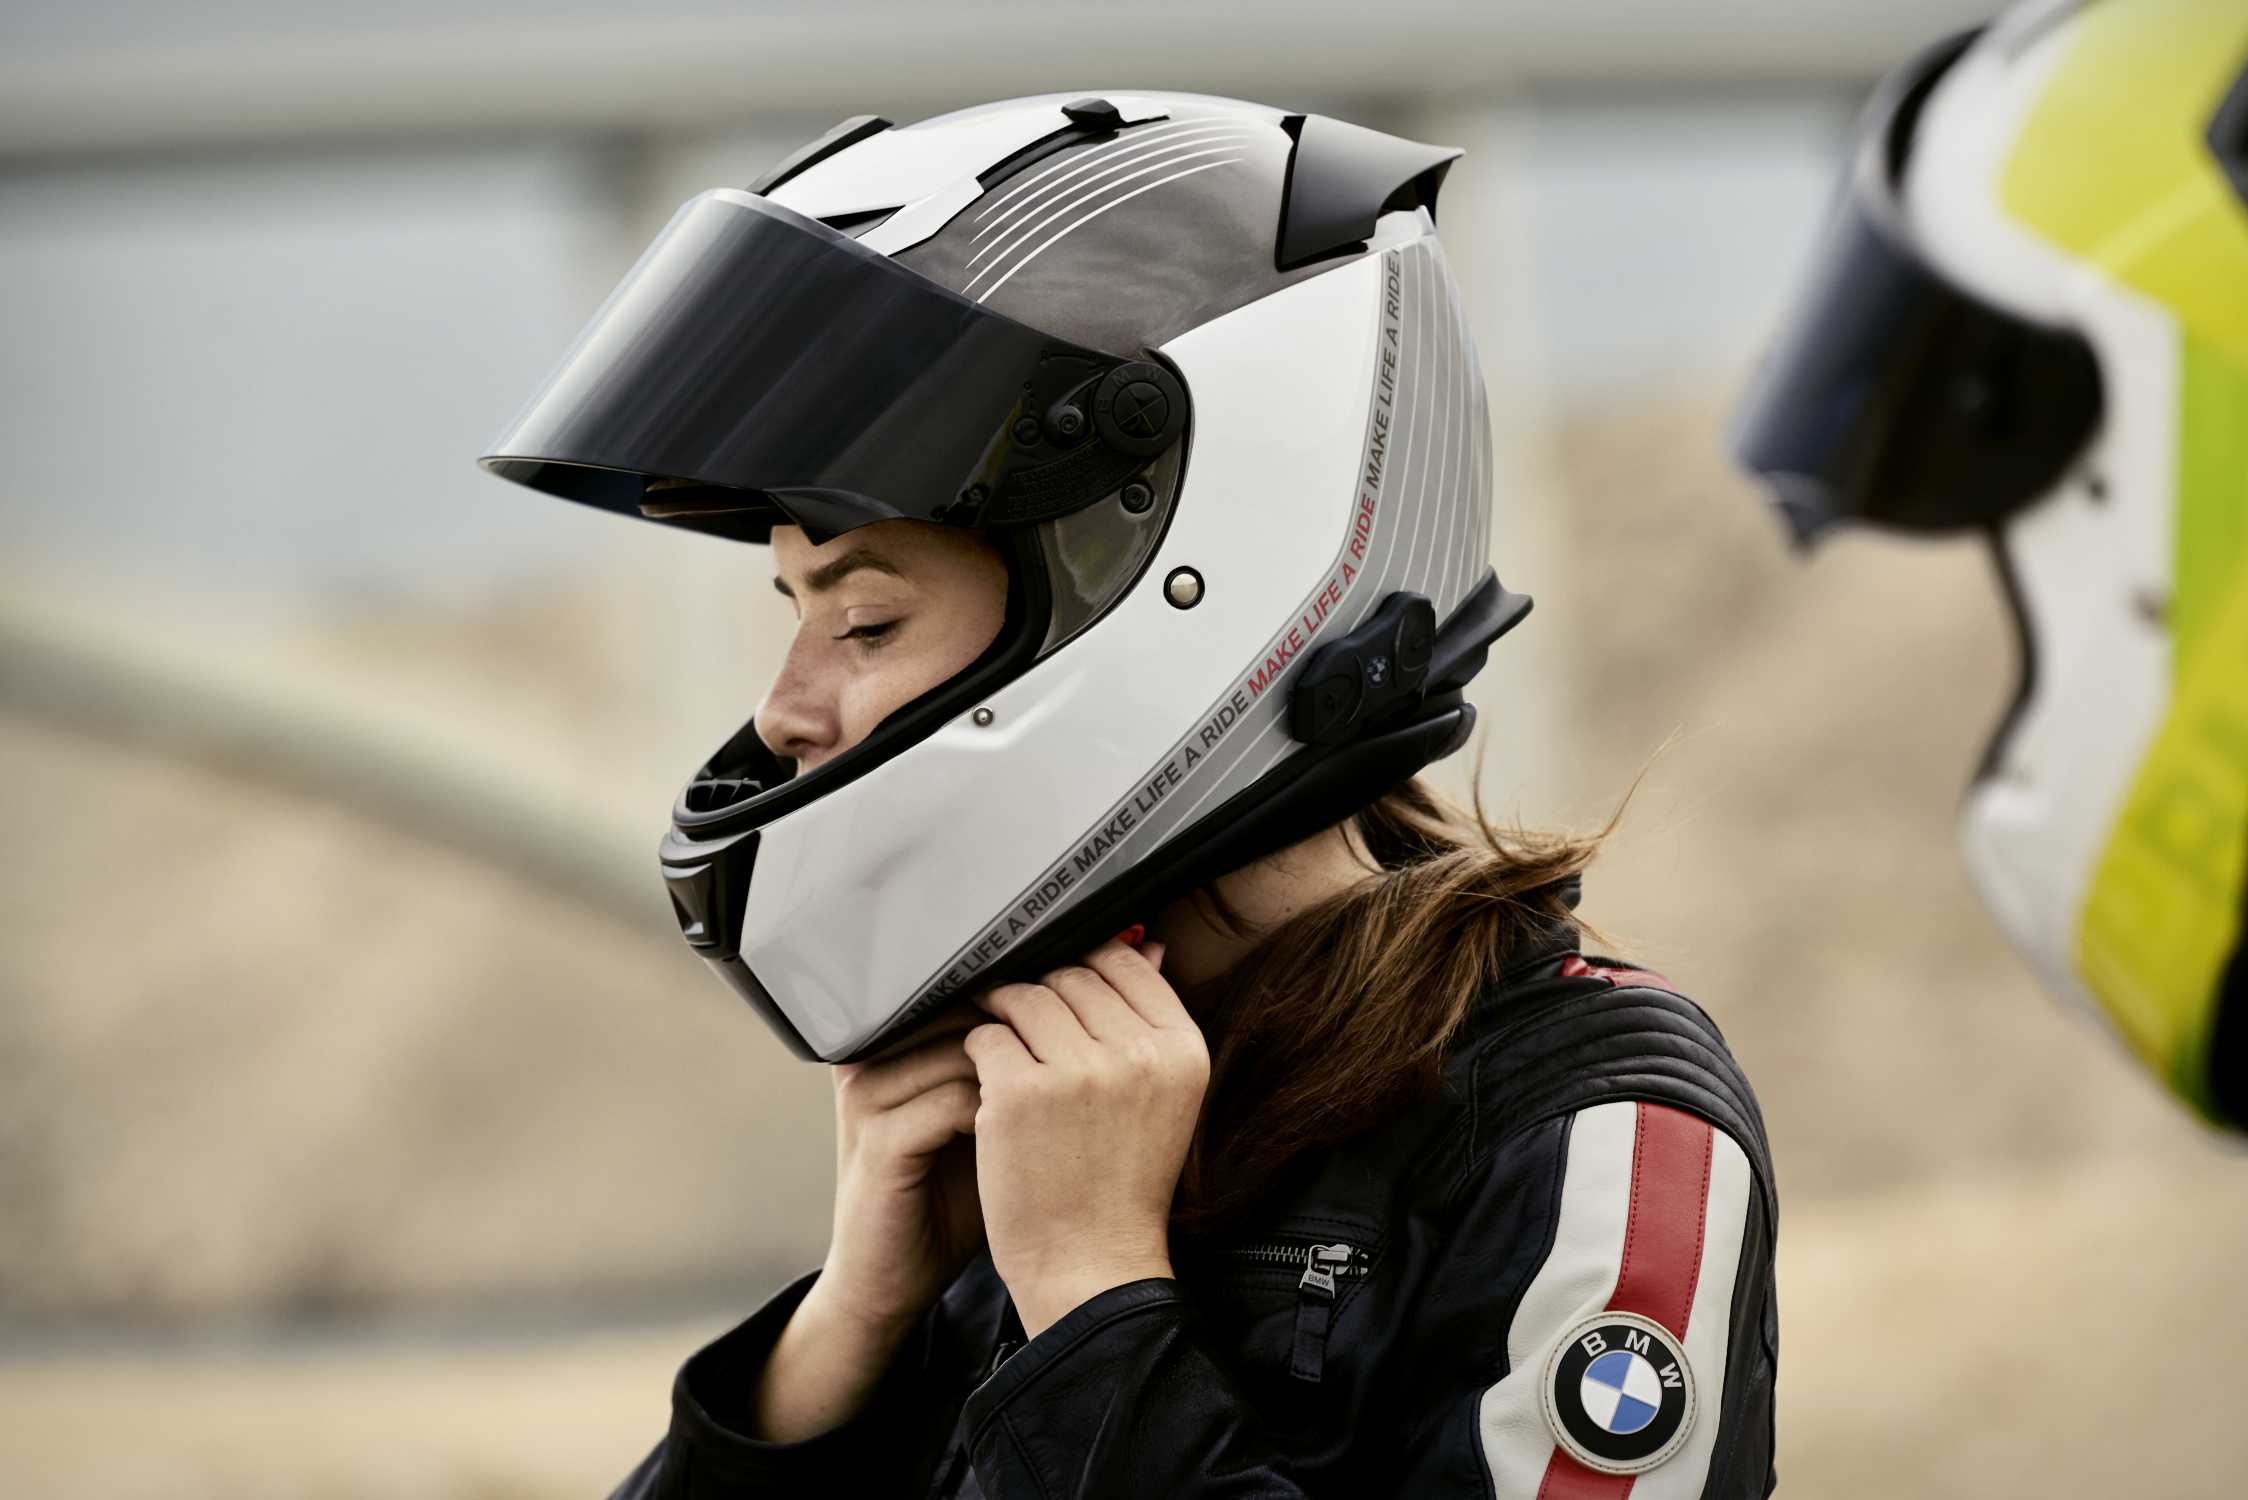 Retroactive 5 Year Extended Warranty on these BMW Helmets • Total